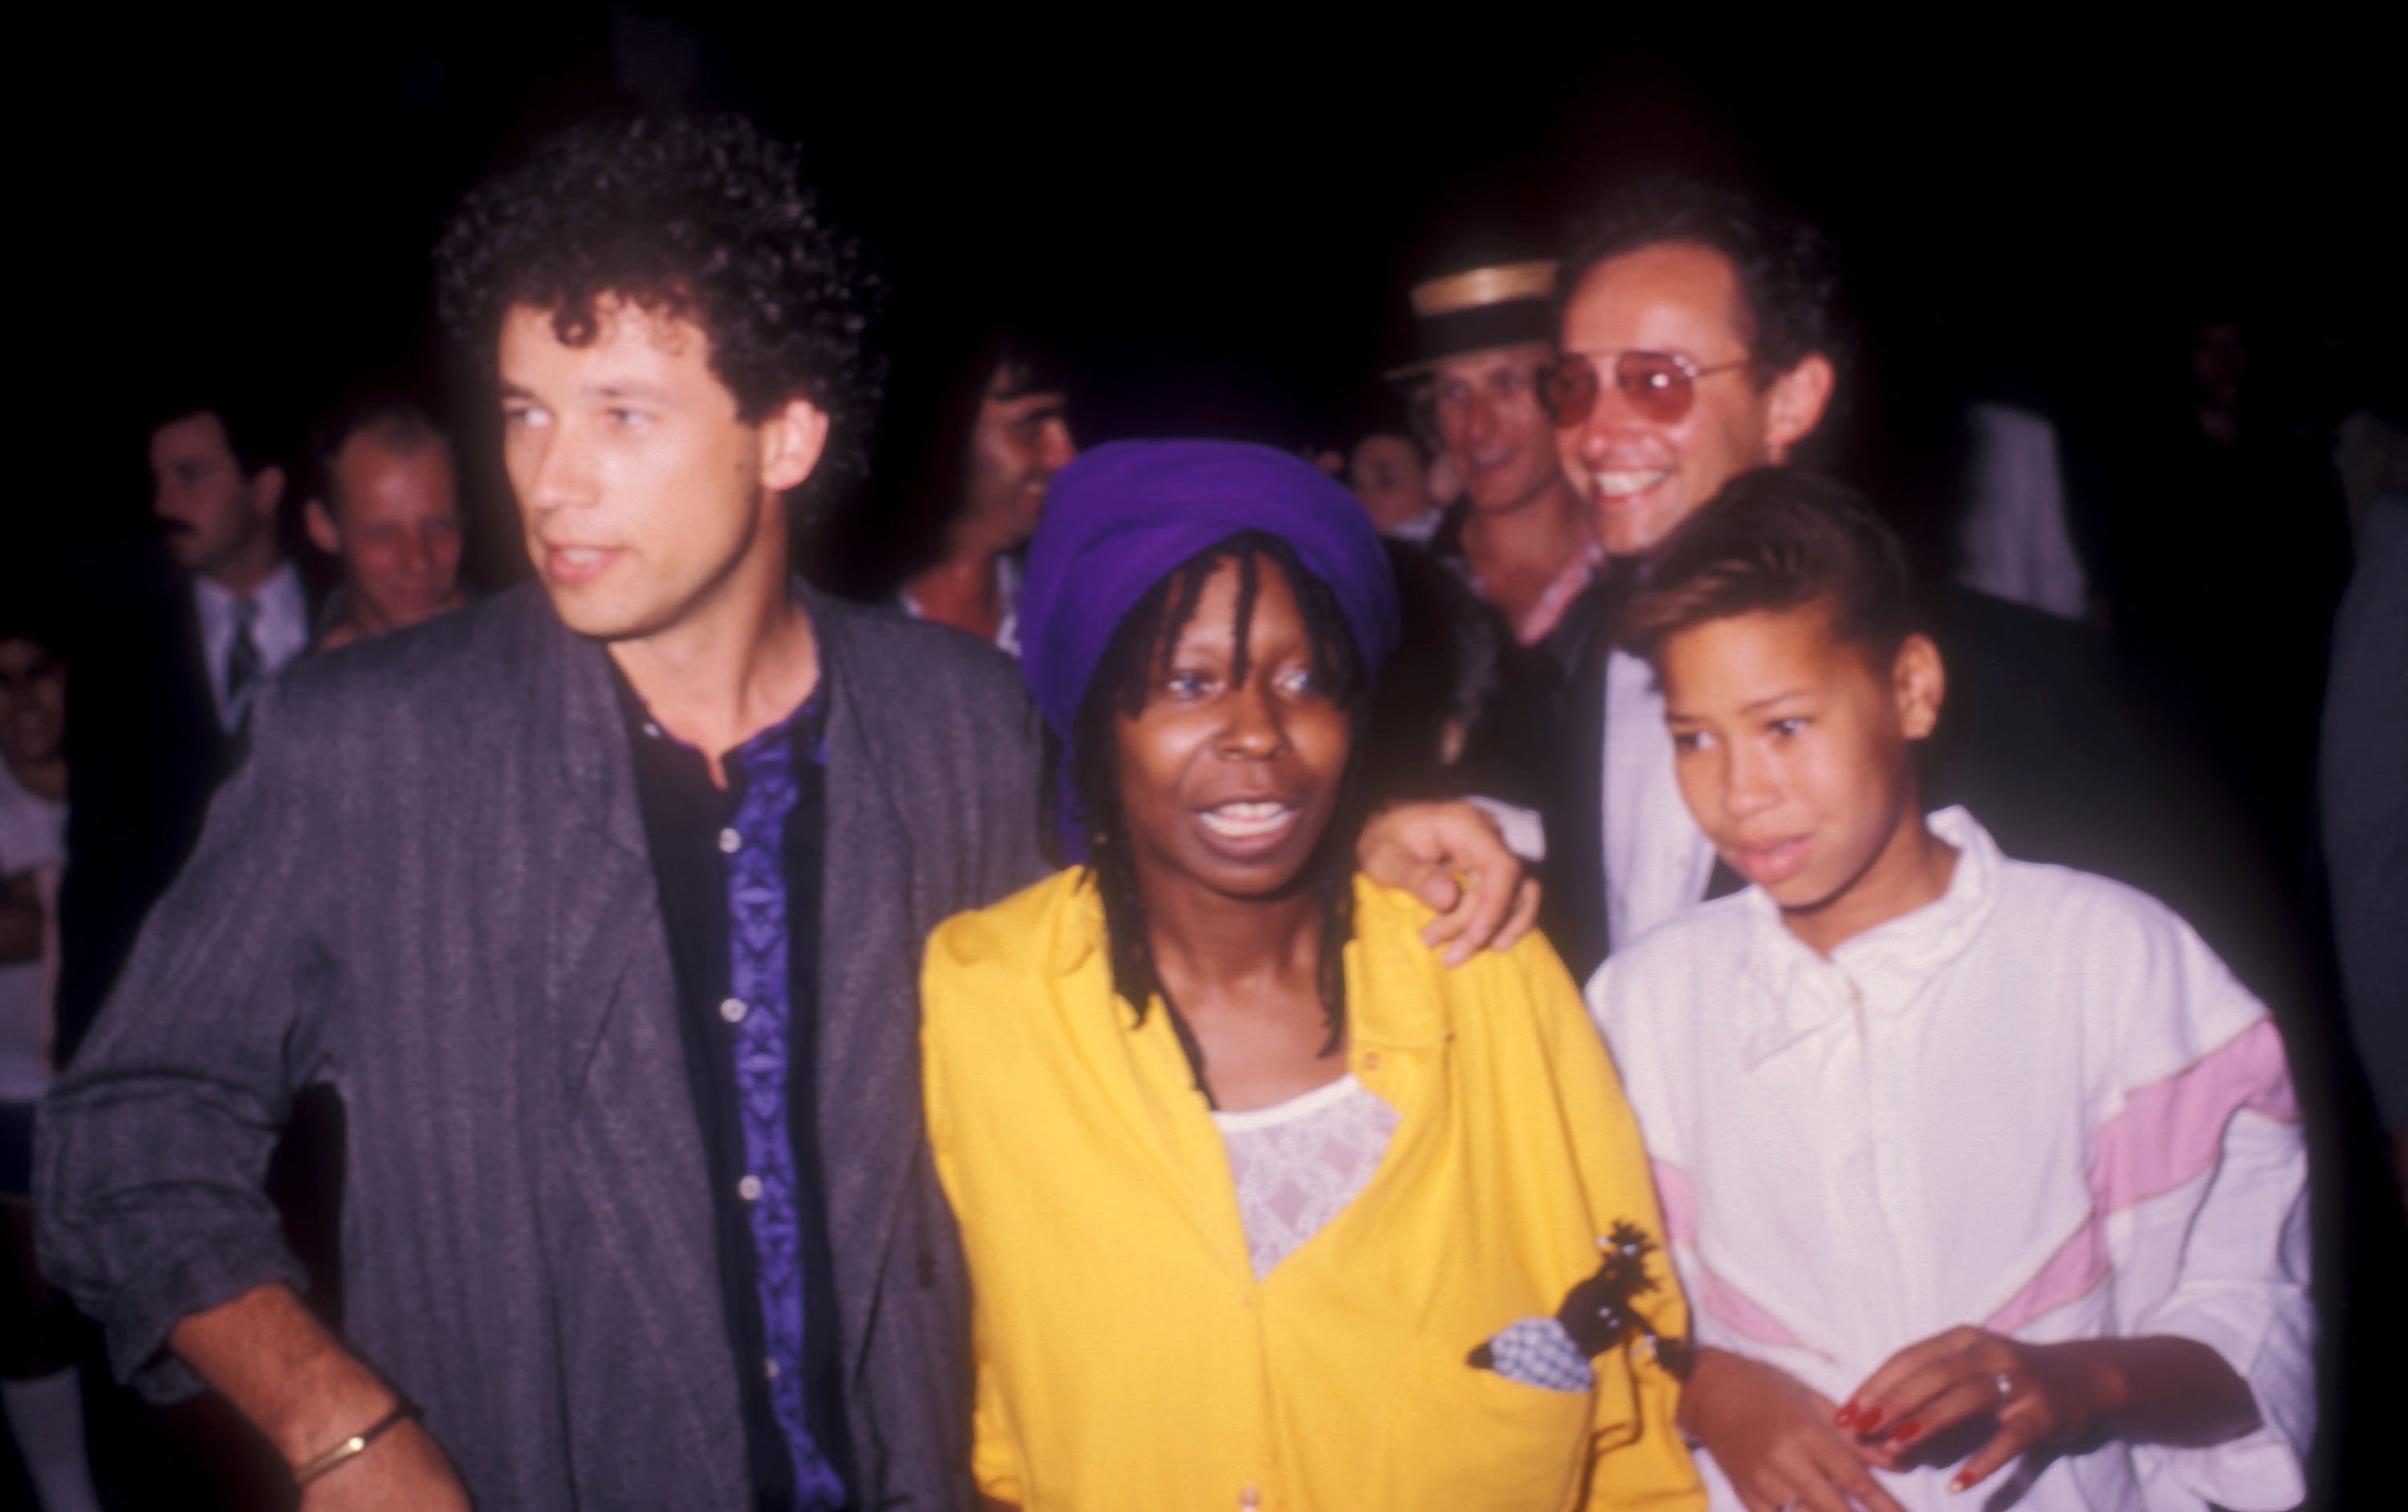 David Claessen, Whoopi Goldberg and Alex Martin at Whoopi Goldberg Wedding Reception, 1986, in Los Angeles, California, United States | Source: Getty Images